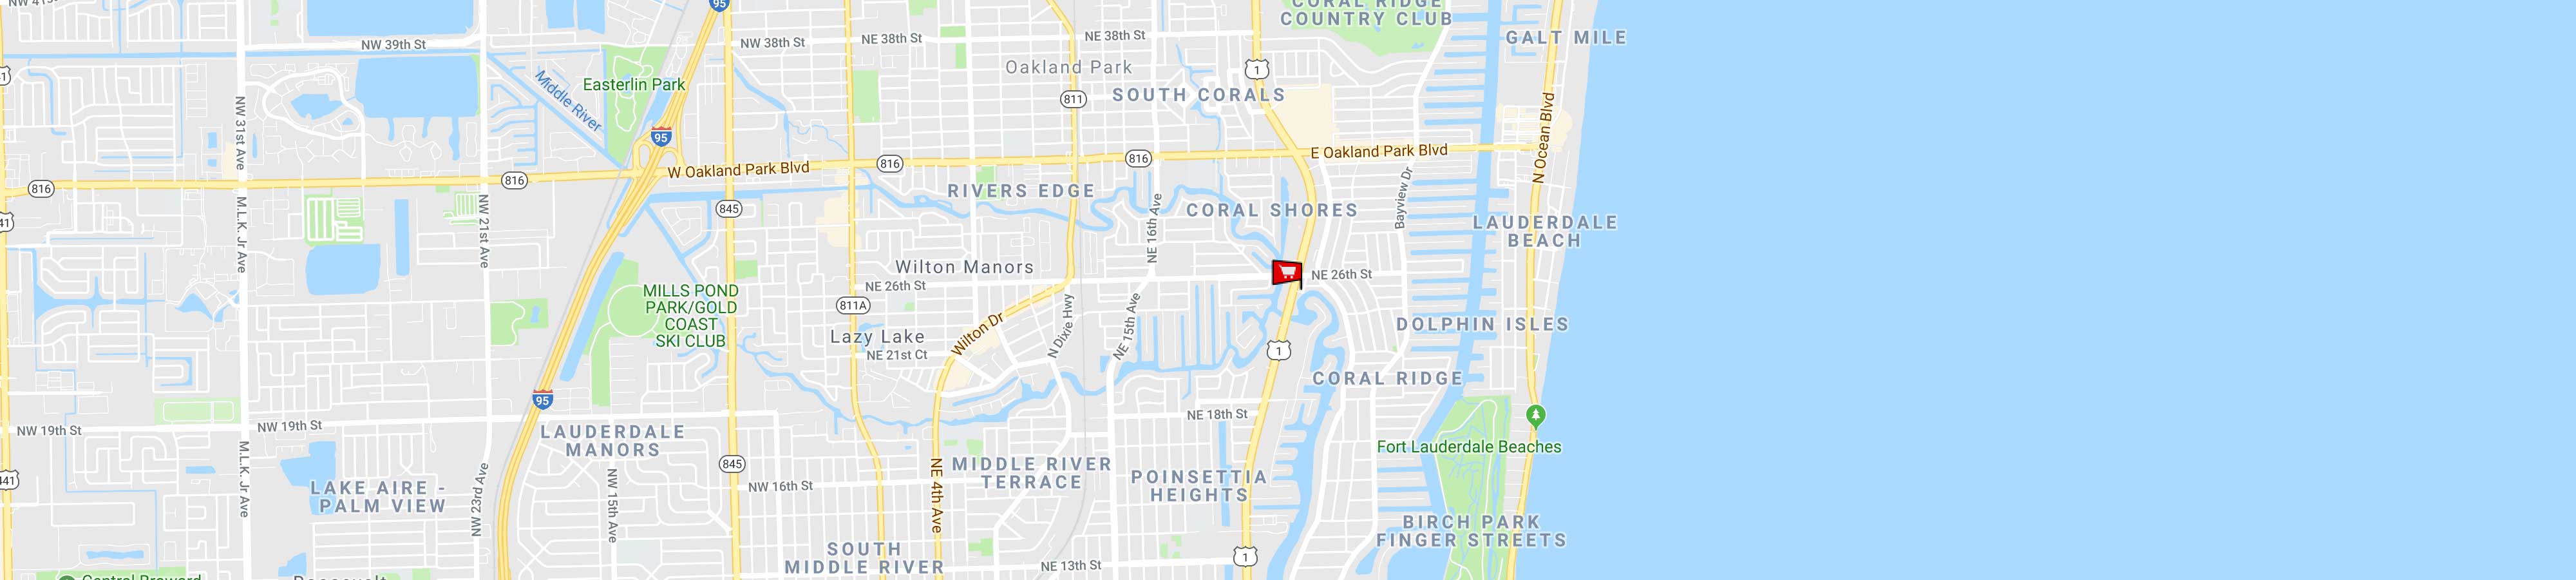 Fort Lauderdale Store Map